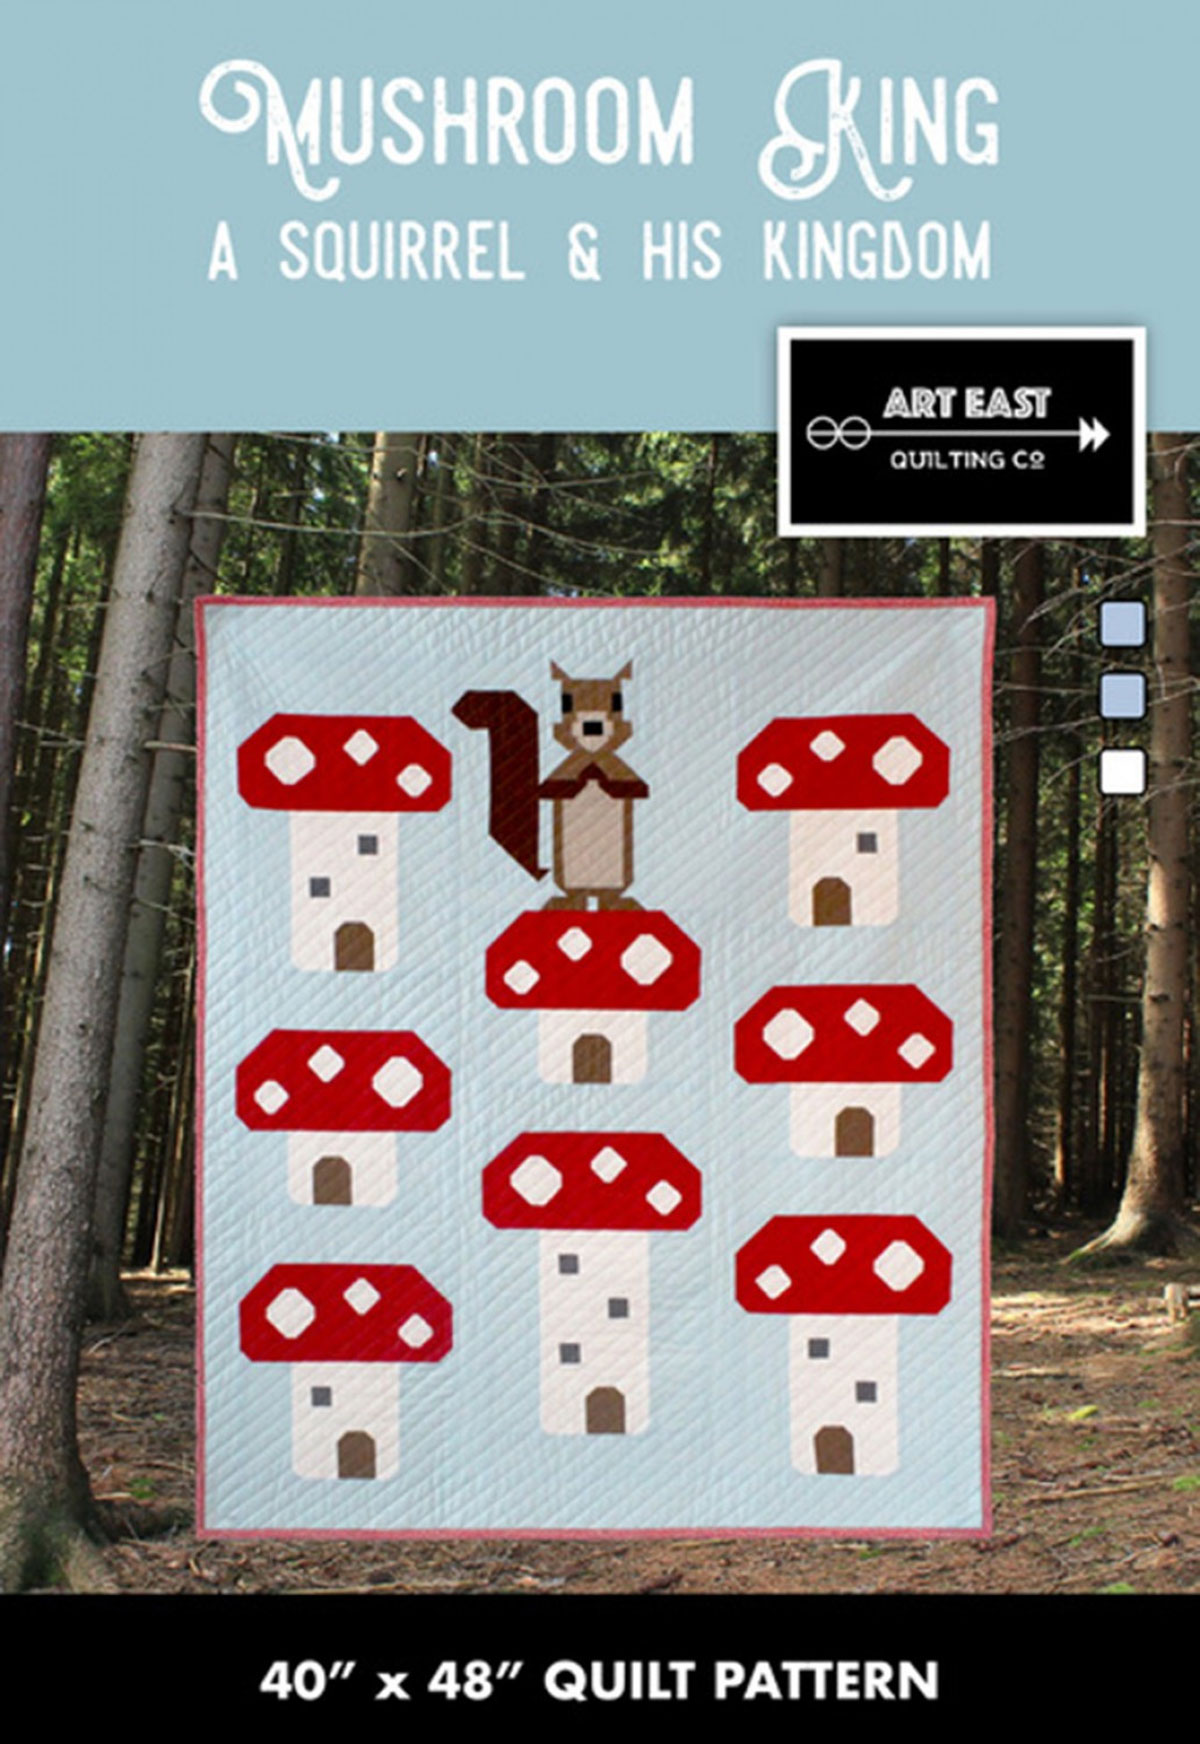 Mushroom-King-quilt-sewing-pattern-Art-East-Quilting-Co-front